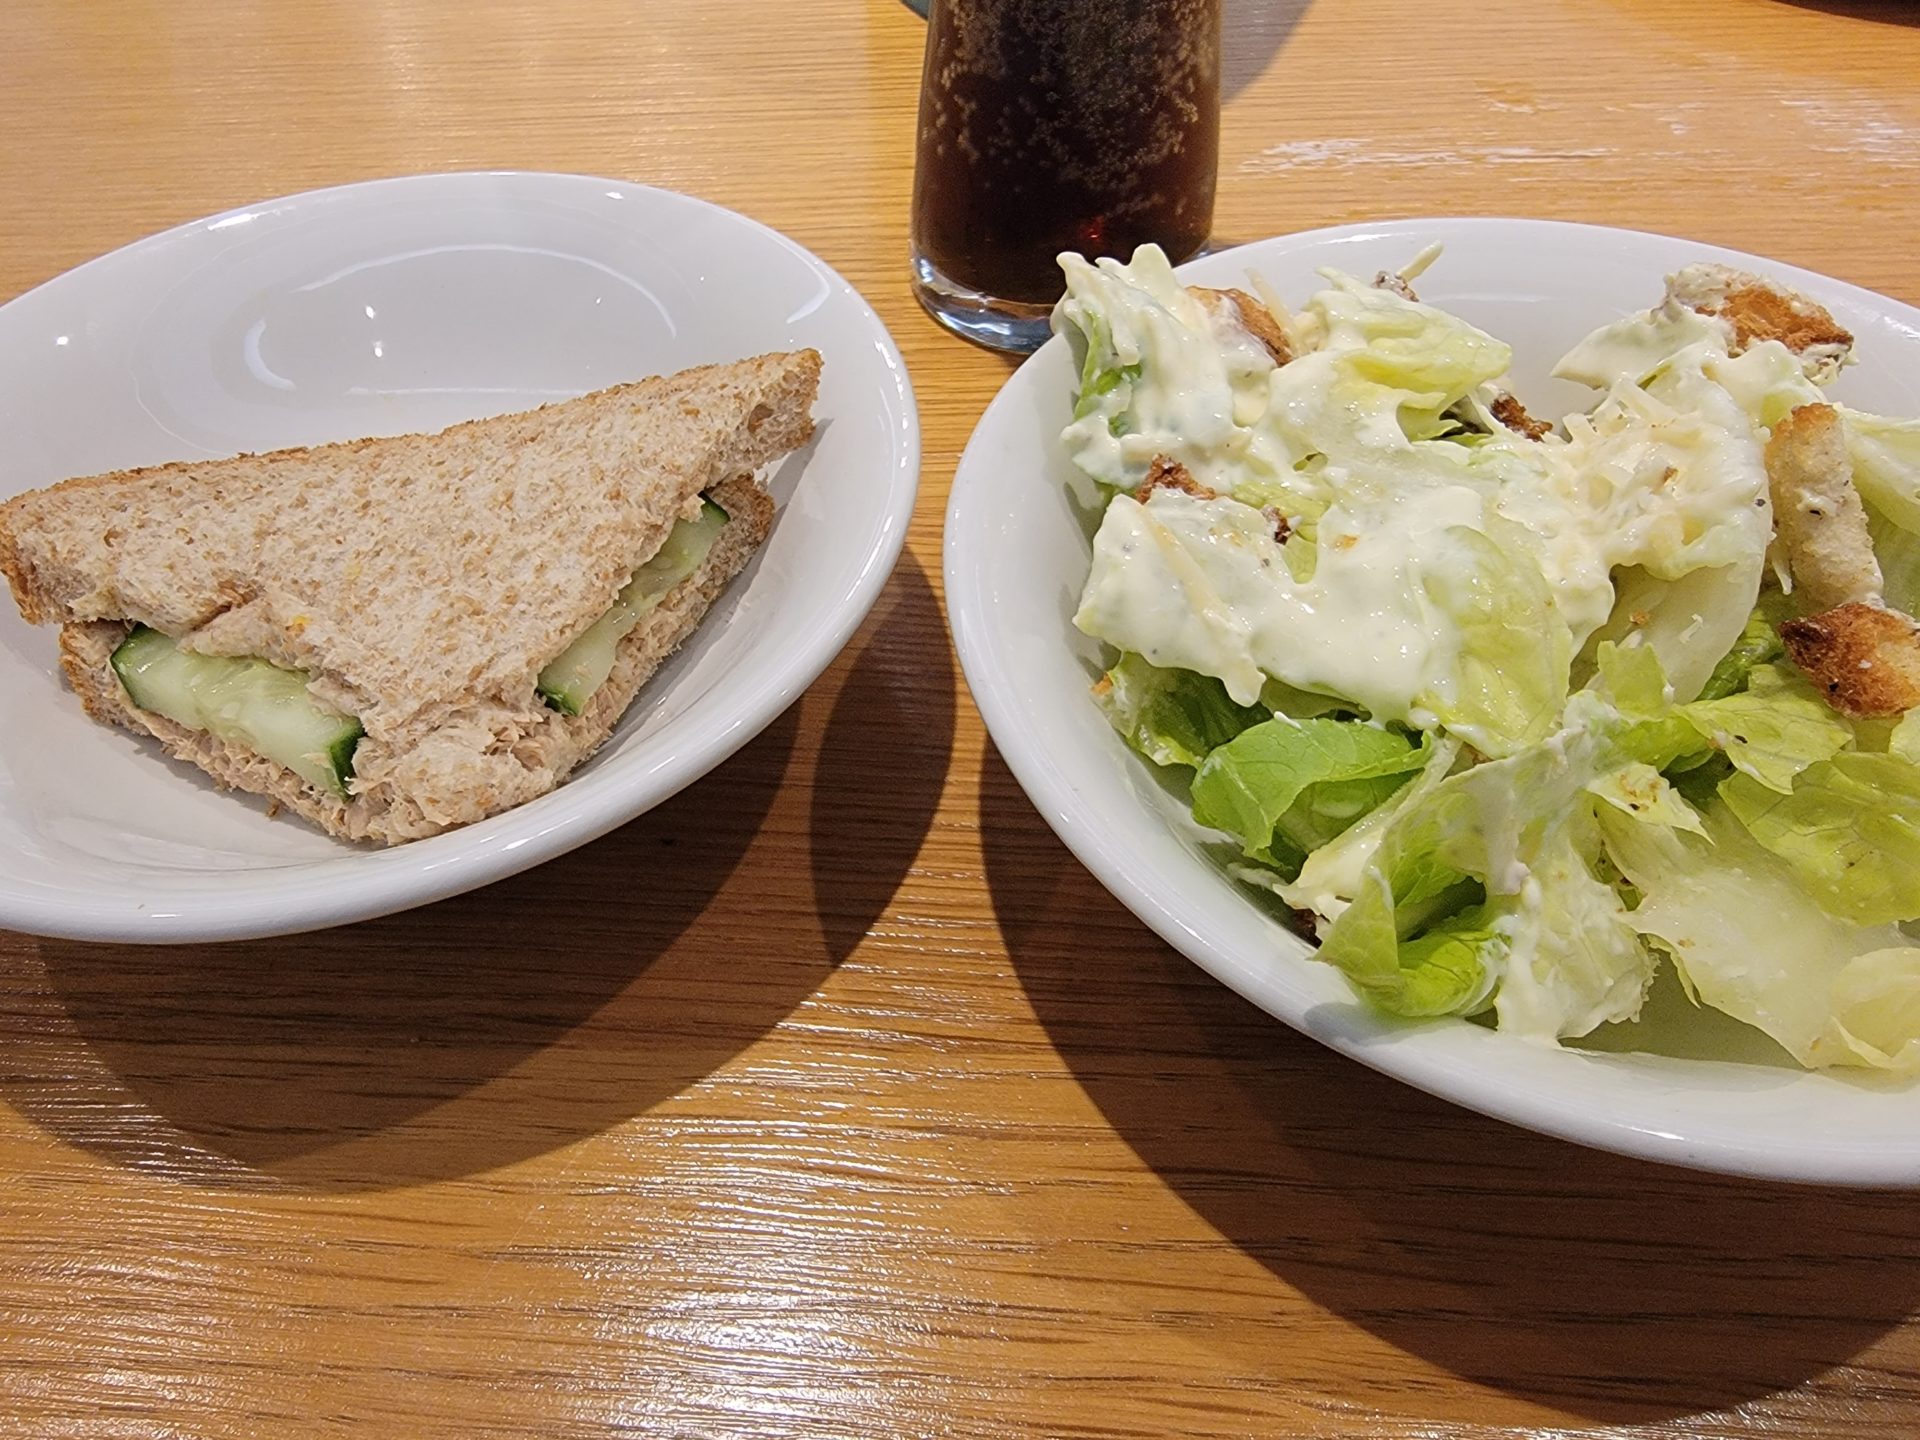 a sandwich and salad in a bowl